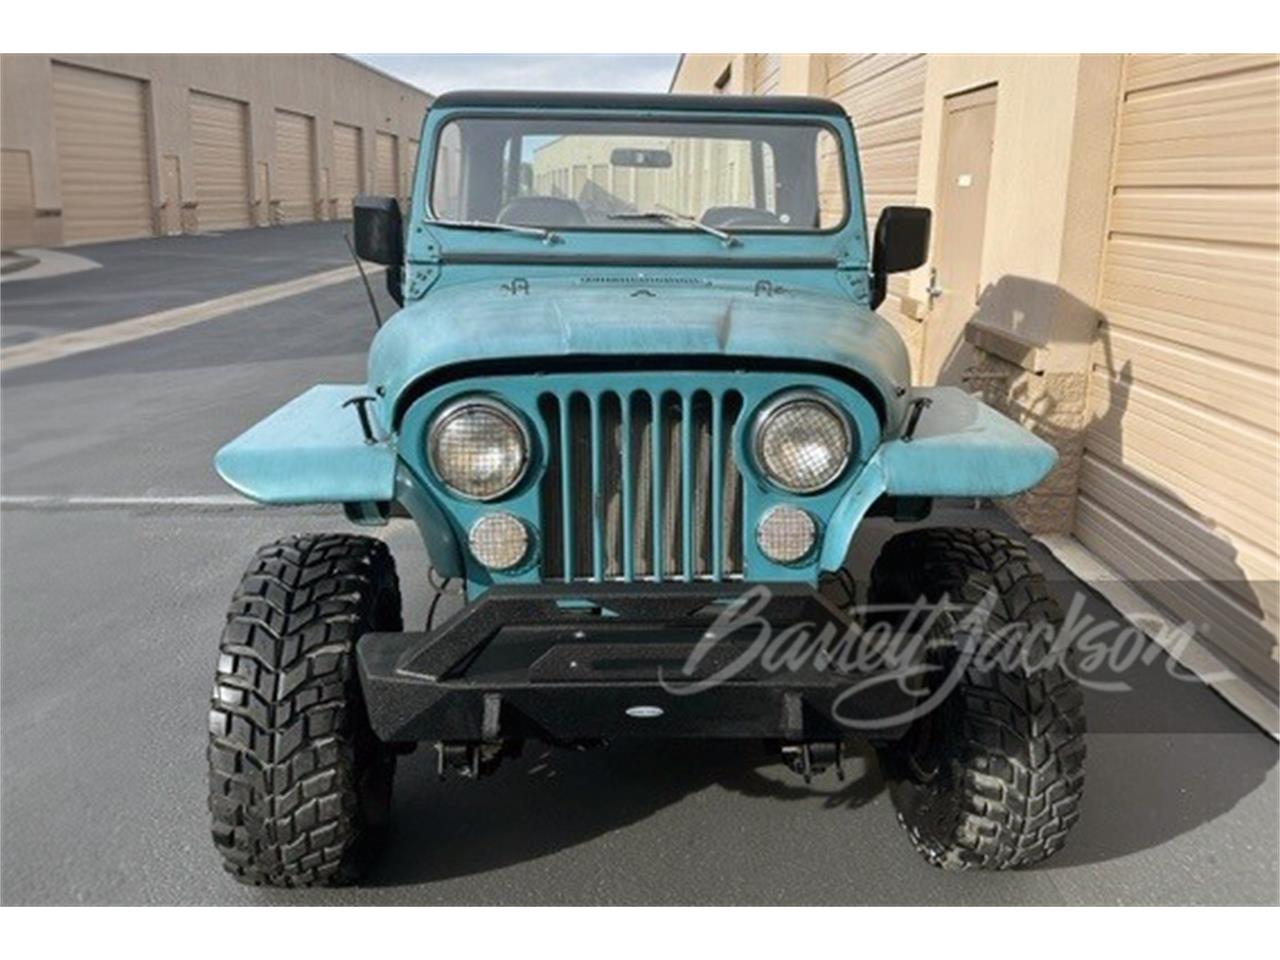 For Sale at Auction: 1984 Jeep CJ7 in Scottsdale, Arizona for sale in Scottsdale, AZ